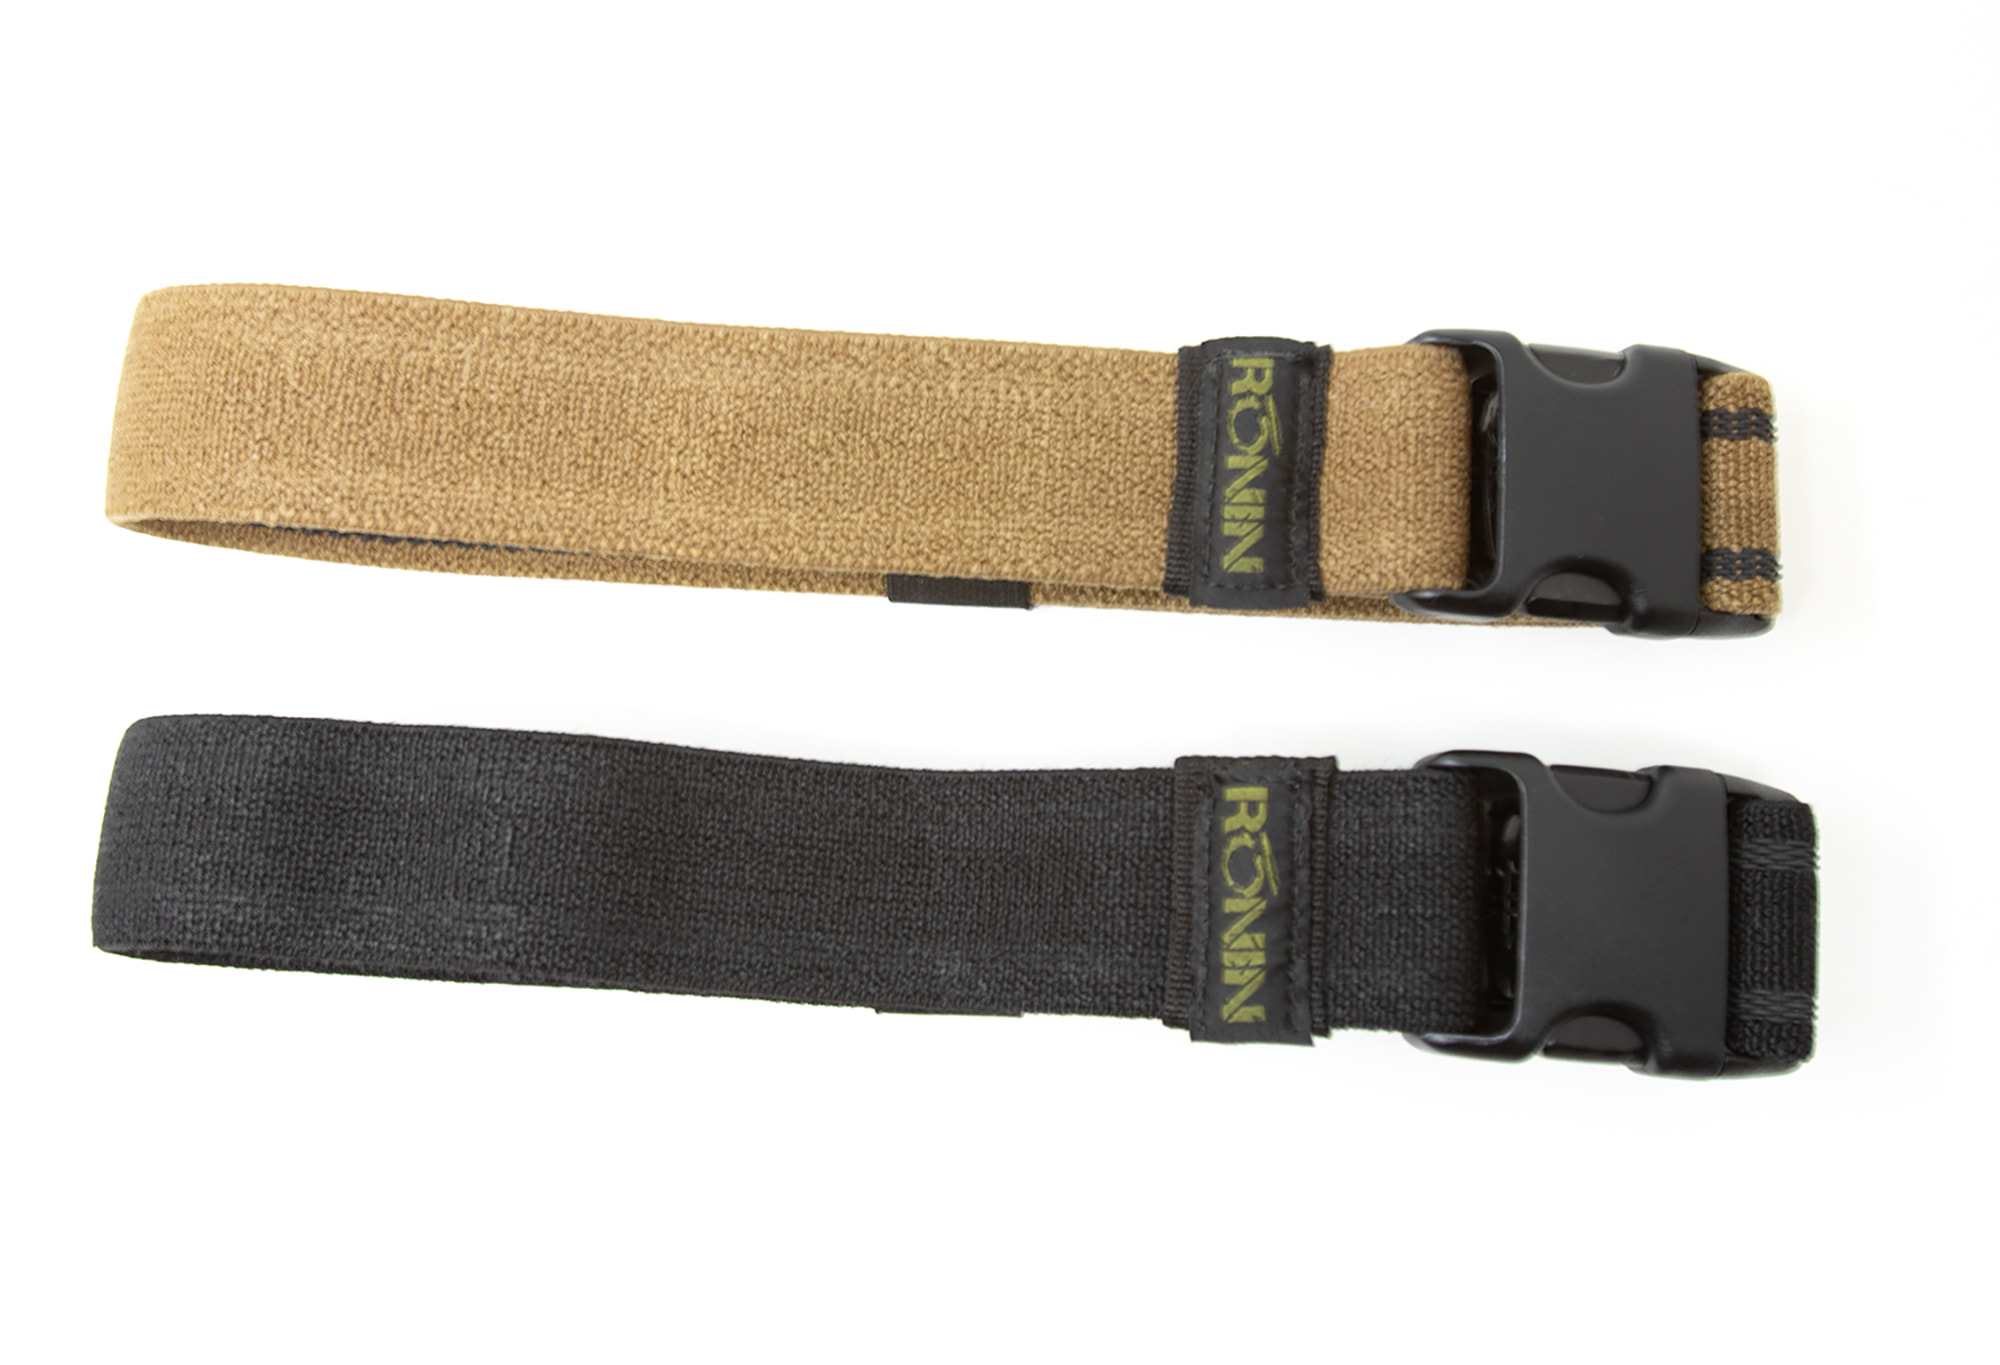 TMC Tactical Thigh Strap Elastic Band Strap version 2.0 for Thigh Holster Camo 